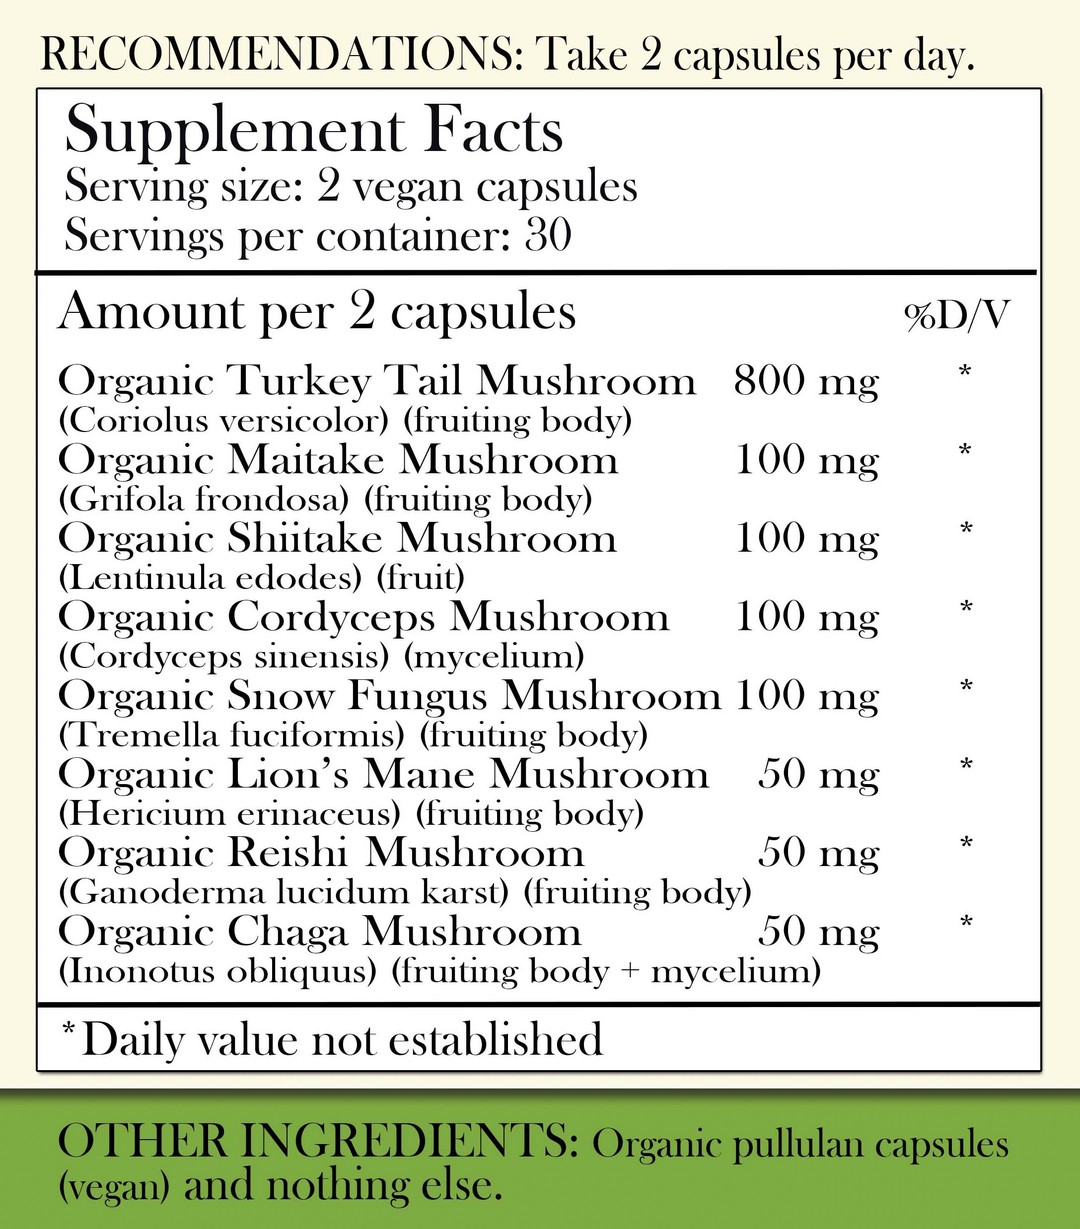 Recommendations: Take 2 capsules per day. Supplement Facts - Serving Size: 2 vegan capsules Servings per container: 30 Amount per 2 capsules: Organic Turkey Tail Mushroom (fruiting body) 800mg, Organic Maitake Mushroom (fruiting body) 100mg, Organic Shiitake Mushroom (Fruit) 100 mg, Organic Cordyceps Mushroom (Mycelium) 100 mg, Organic Snow Fungus Mushroom (fruiting body) 100 mg, Organic Lion's Mane Mushroom (fruiting body) 50 mg, Organic Reishi Mushroom (fruiting body) 50 mg, Organic Chaga Mushroom (Fruiting body and mycelium) 50 mg. *Daily value not established. Other Ingredients: Organic Pullulan capsules (vegan) and nothing else.